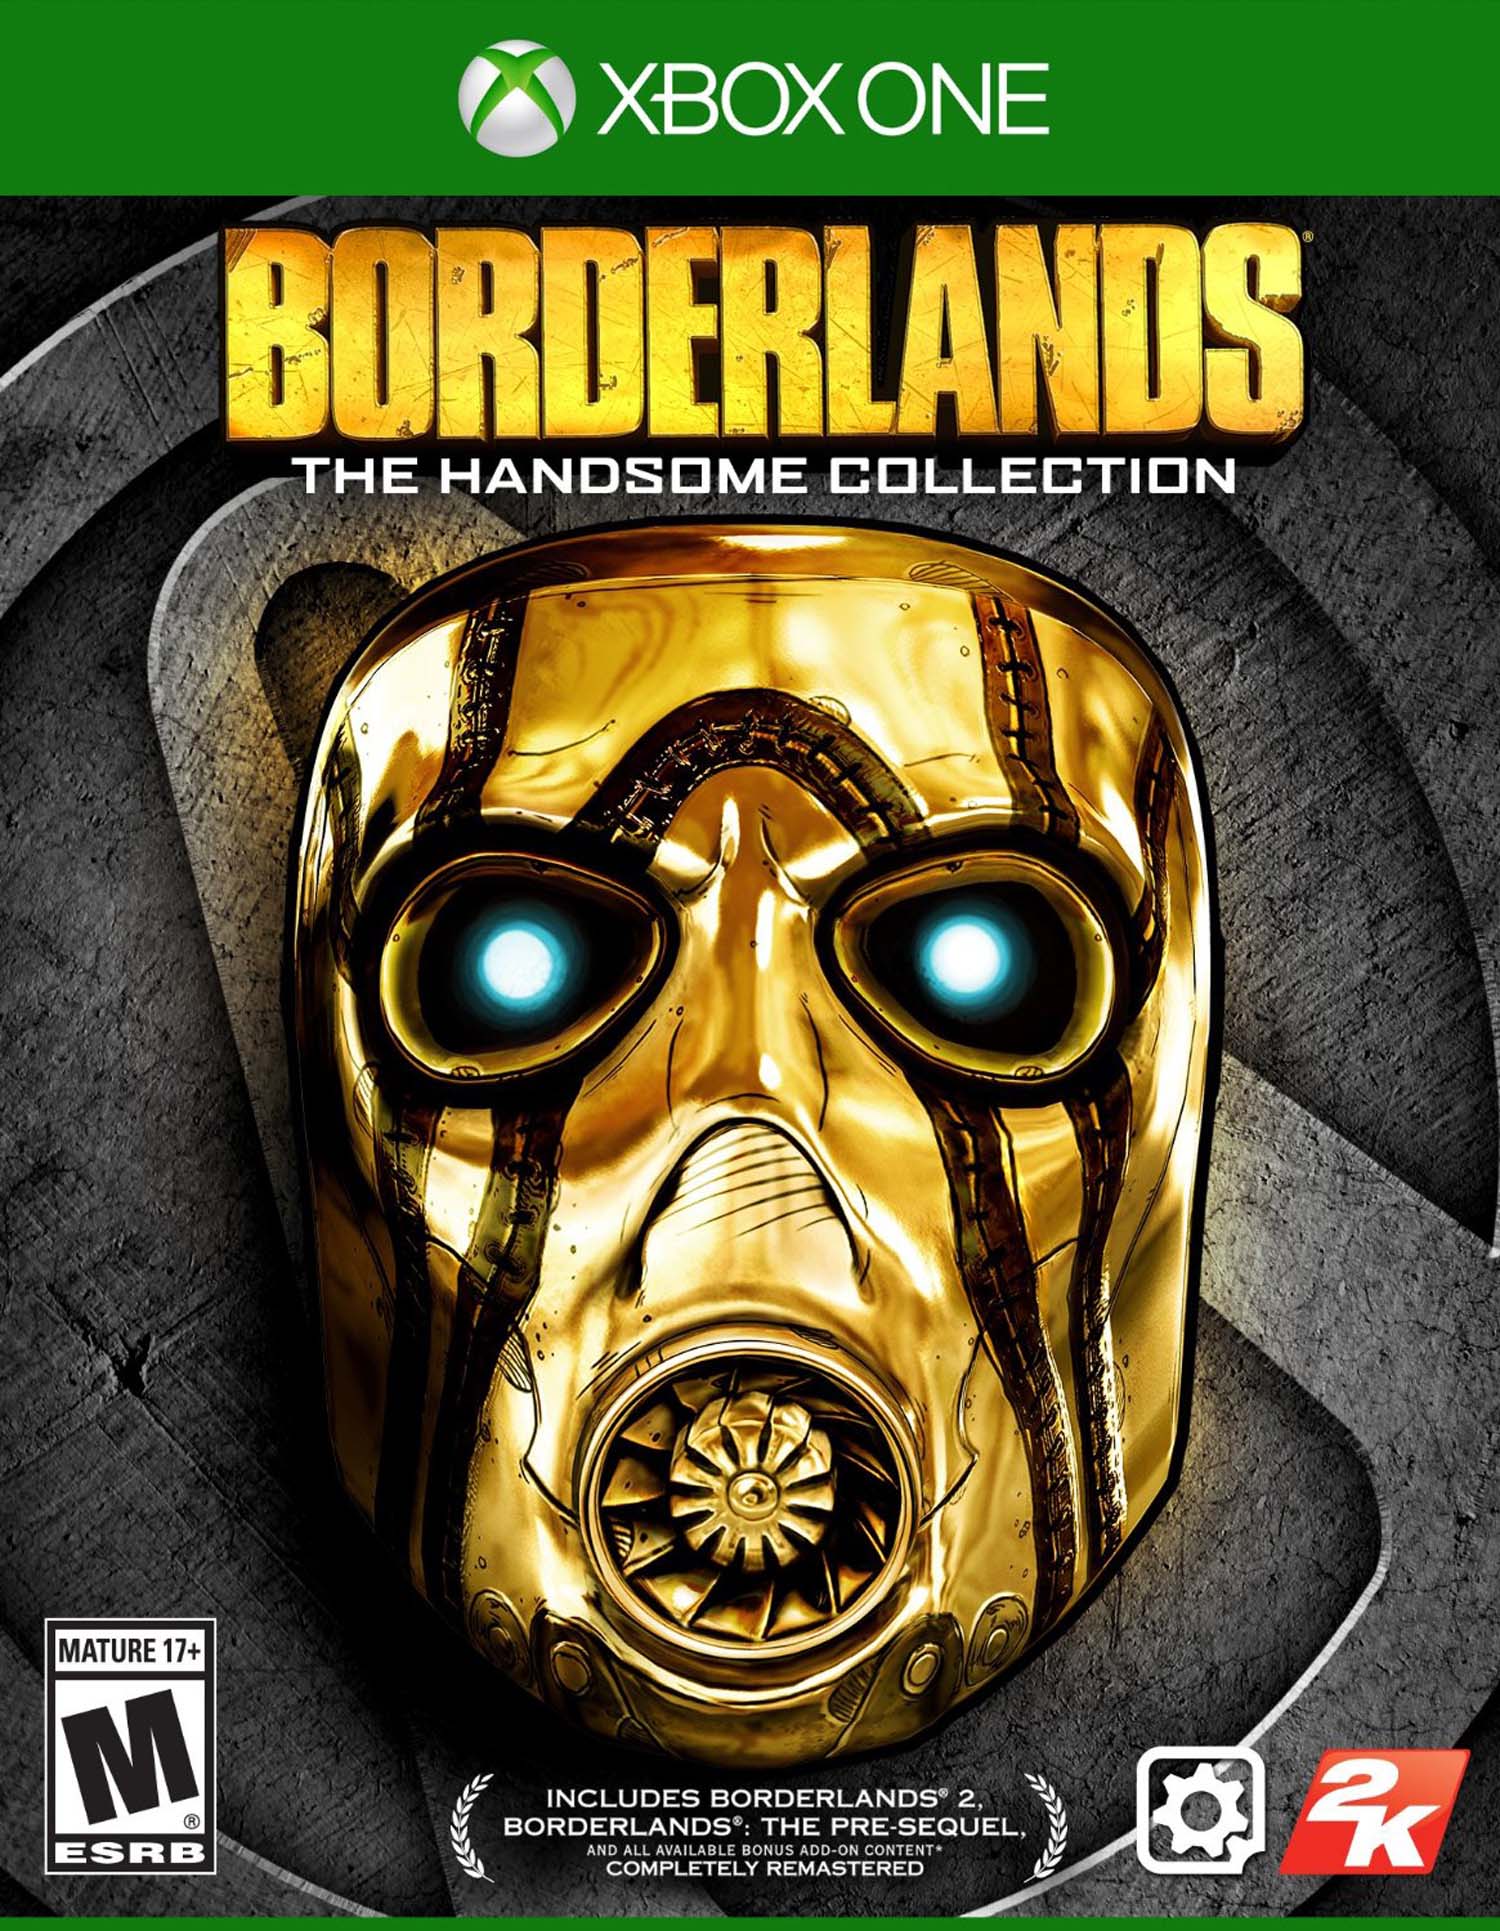 Borderlands: The Handsome Collection, 2K, Xbox One, 710425495328 - image 1 of 41